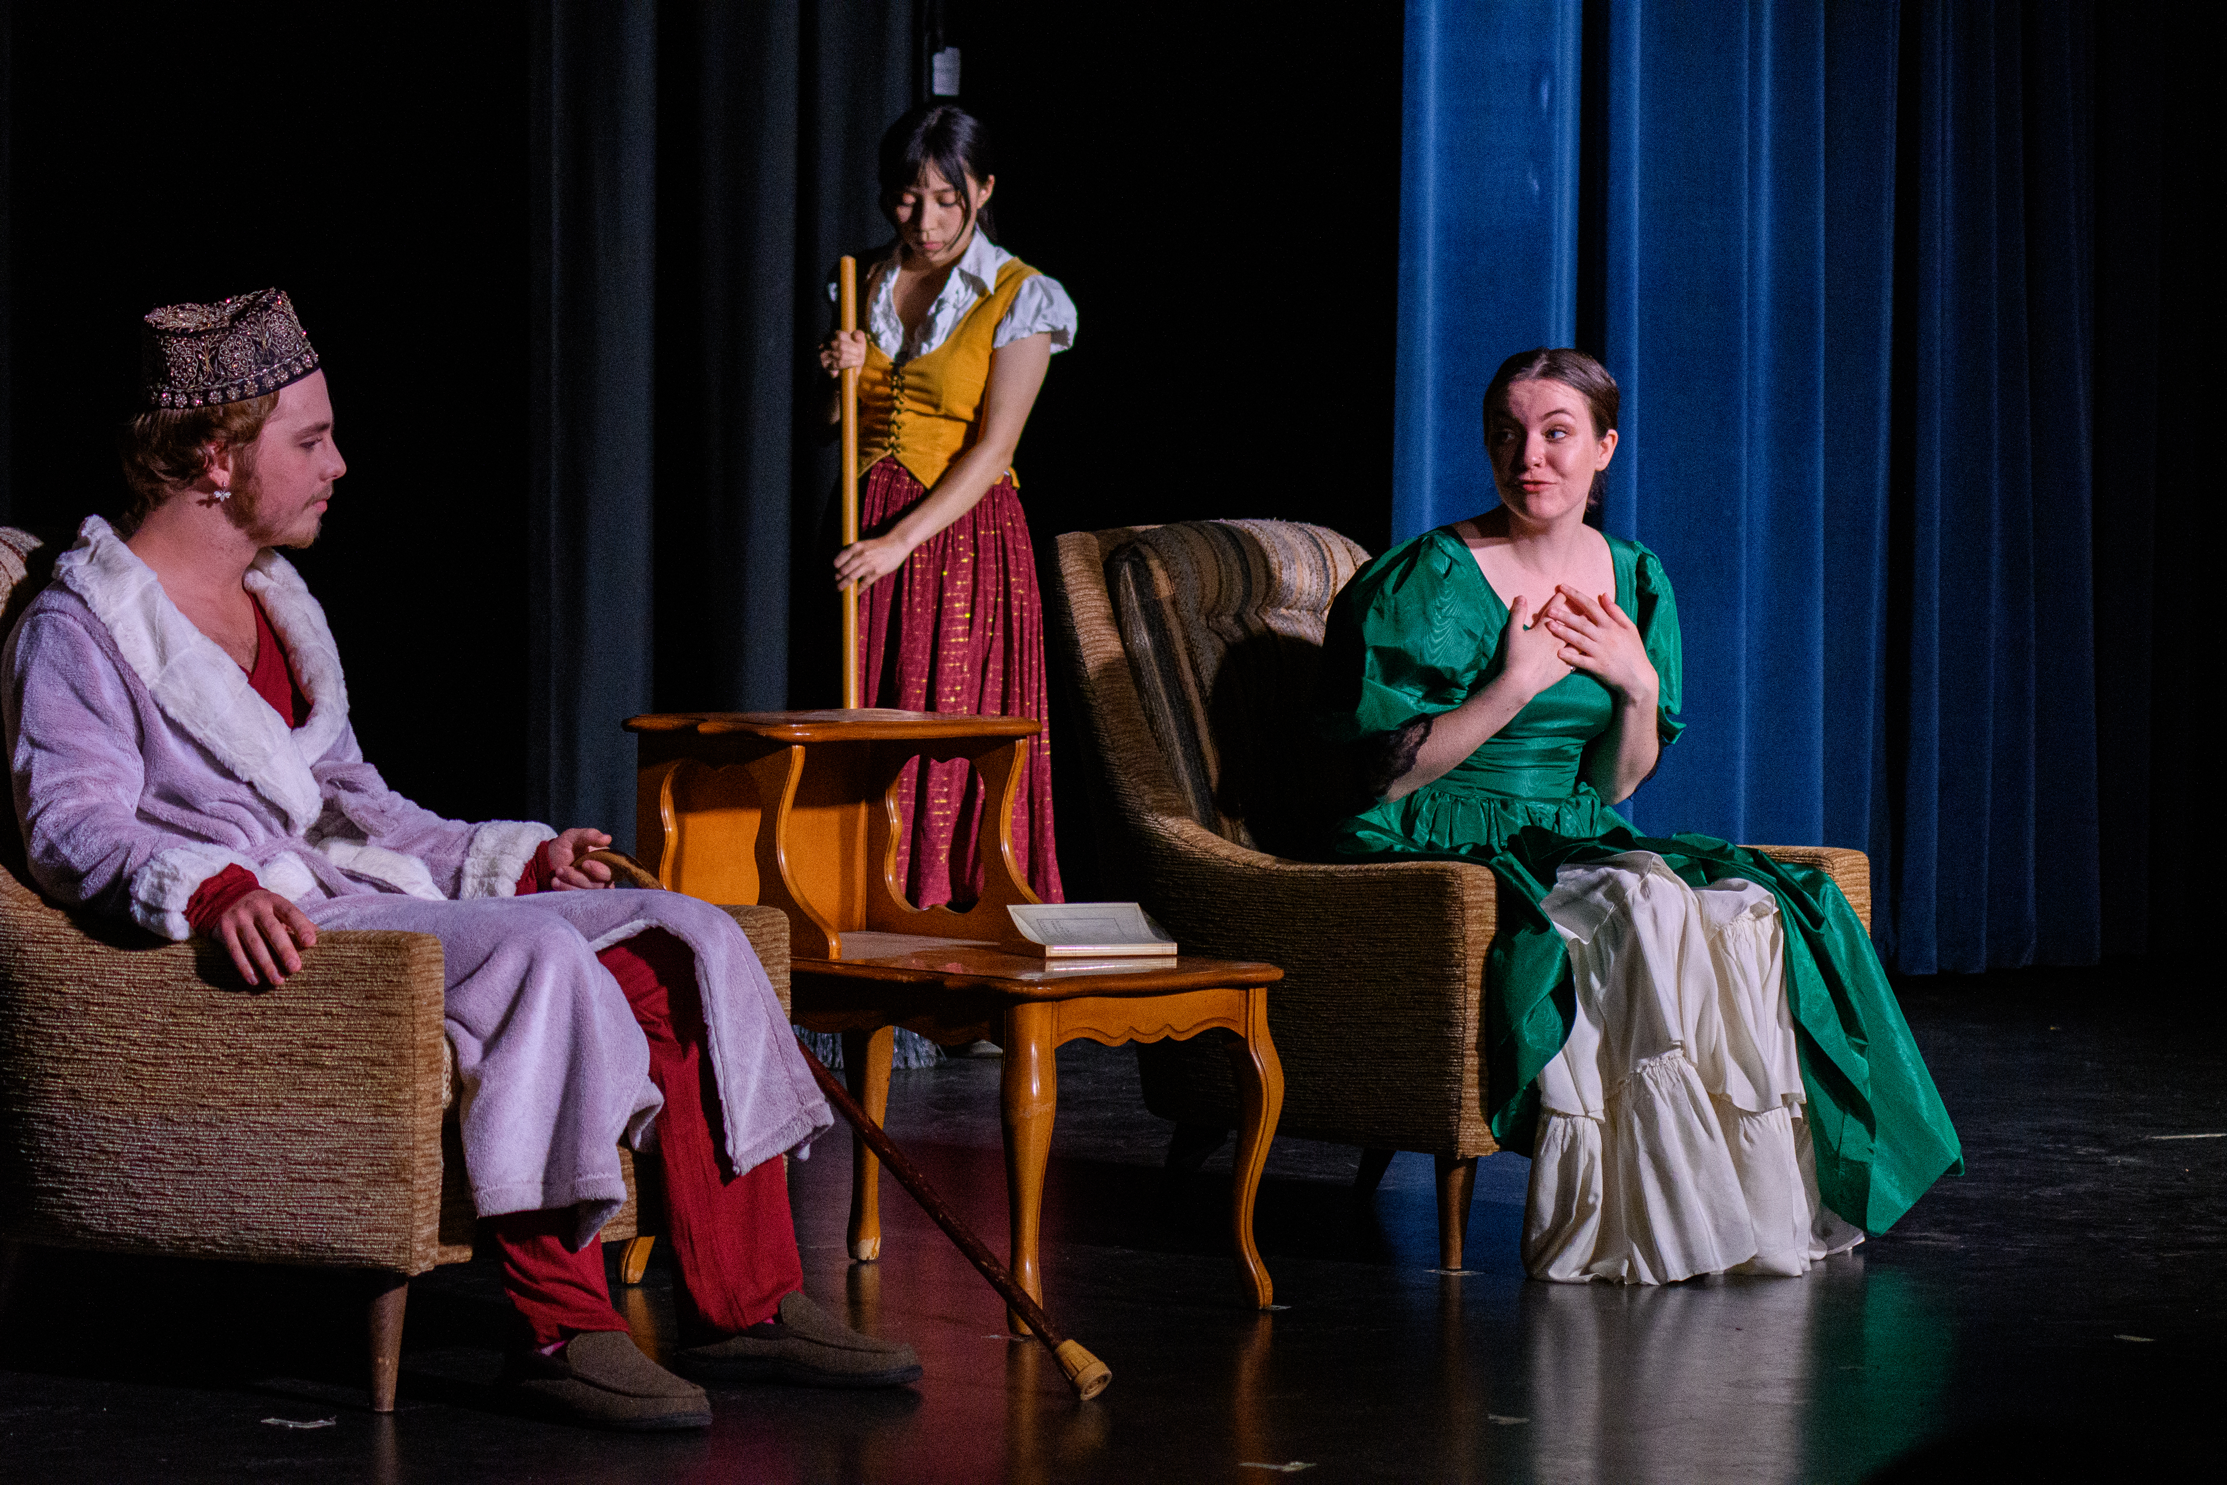 Three actors on stage. Two are sitting in armchairs. The third is sweeping.